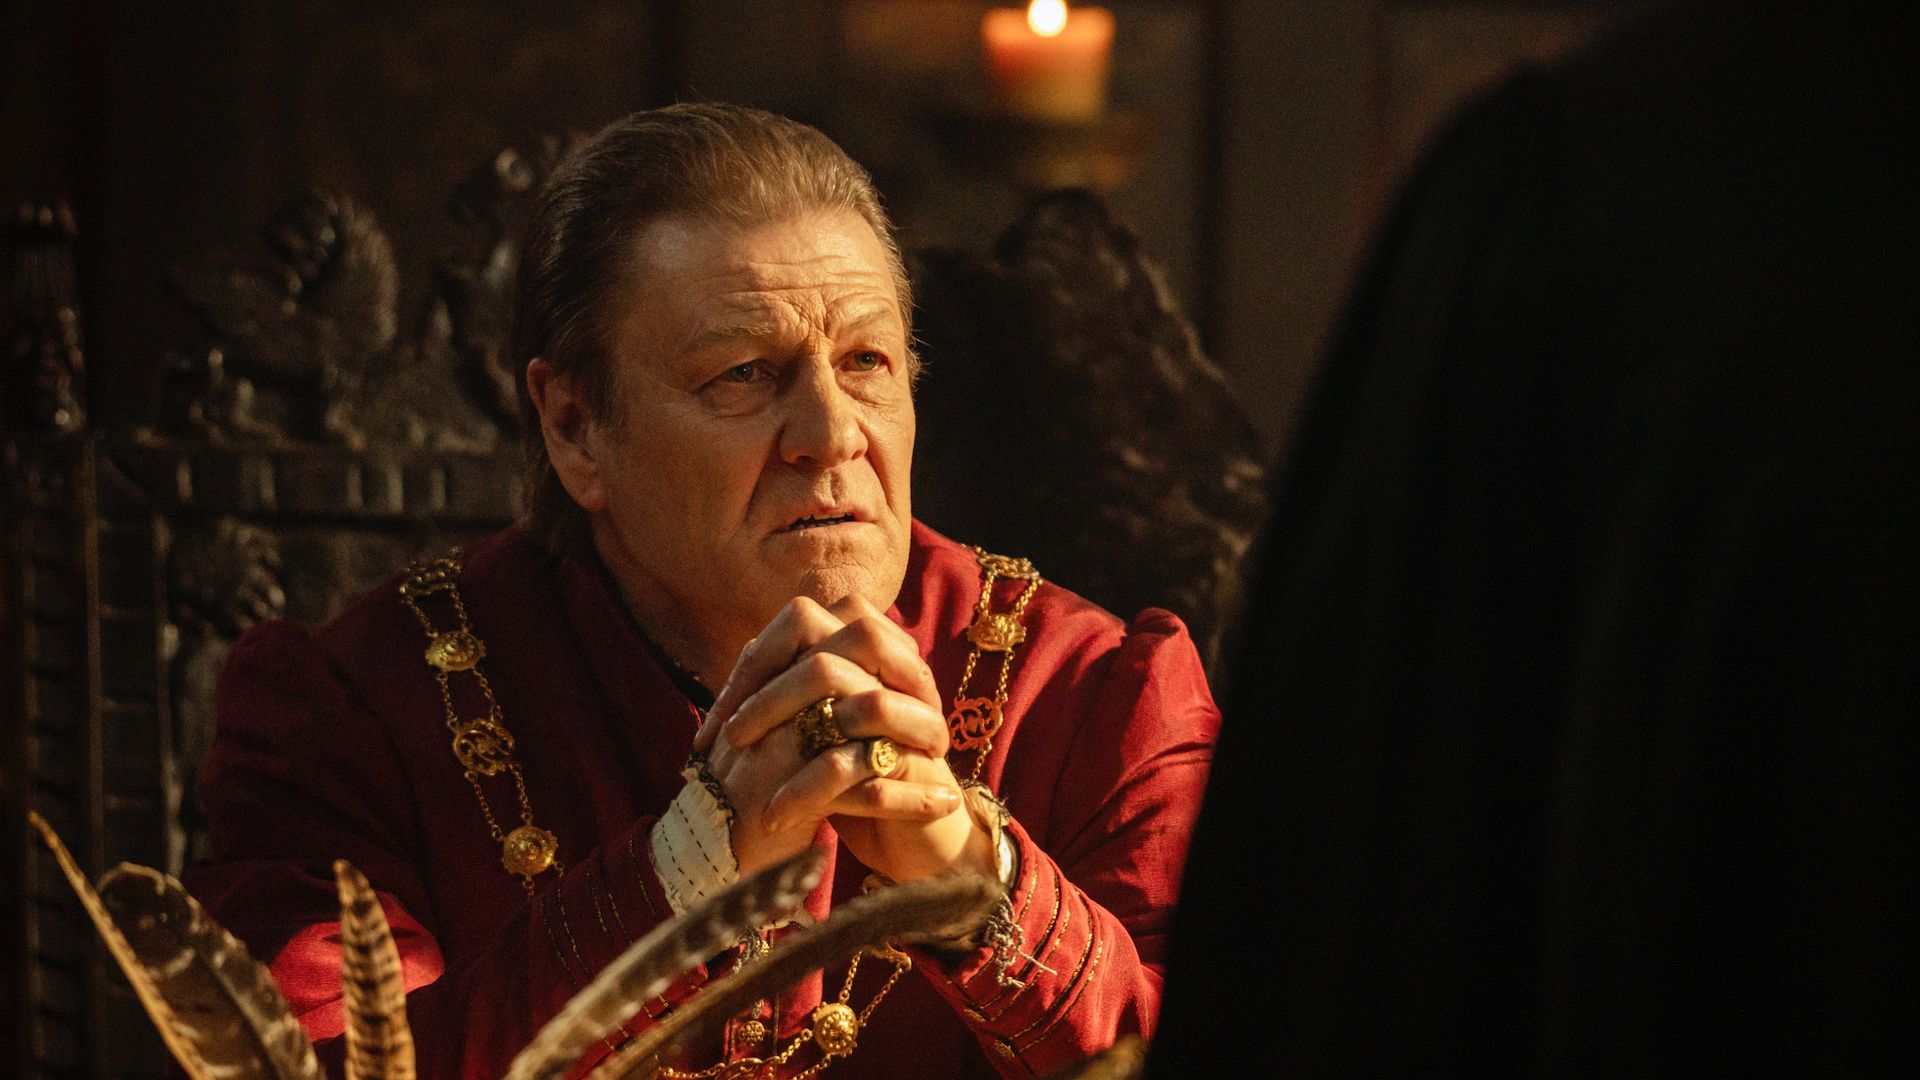 Sean Bean to star in new Disney+ show Shardlake - and it looks seriously good